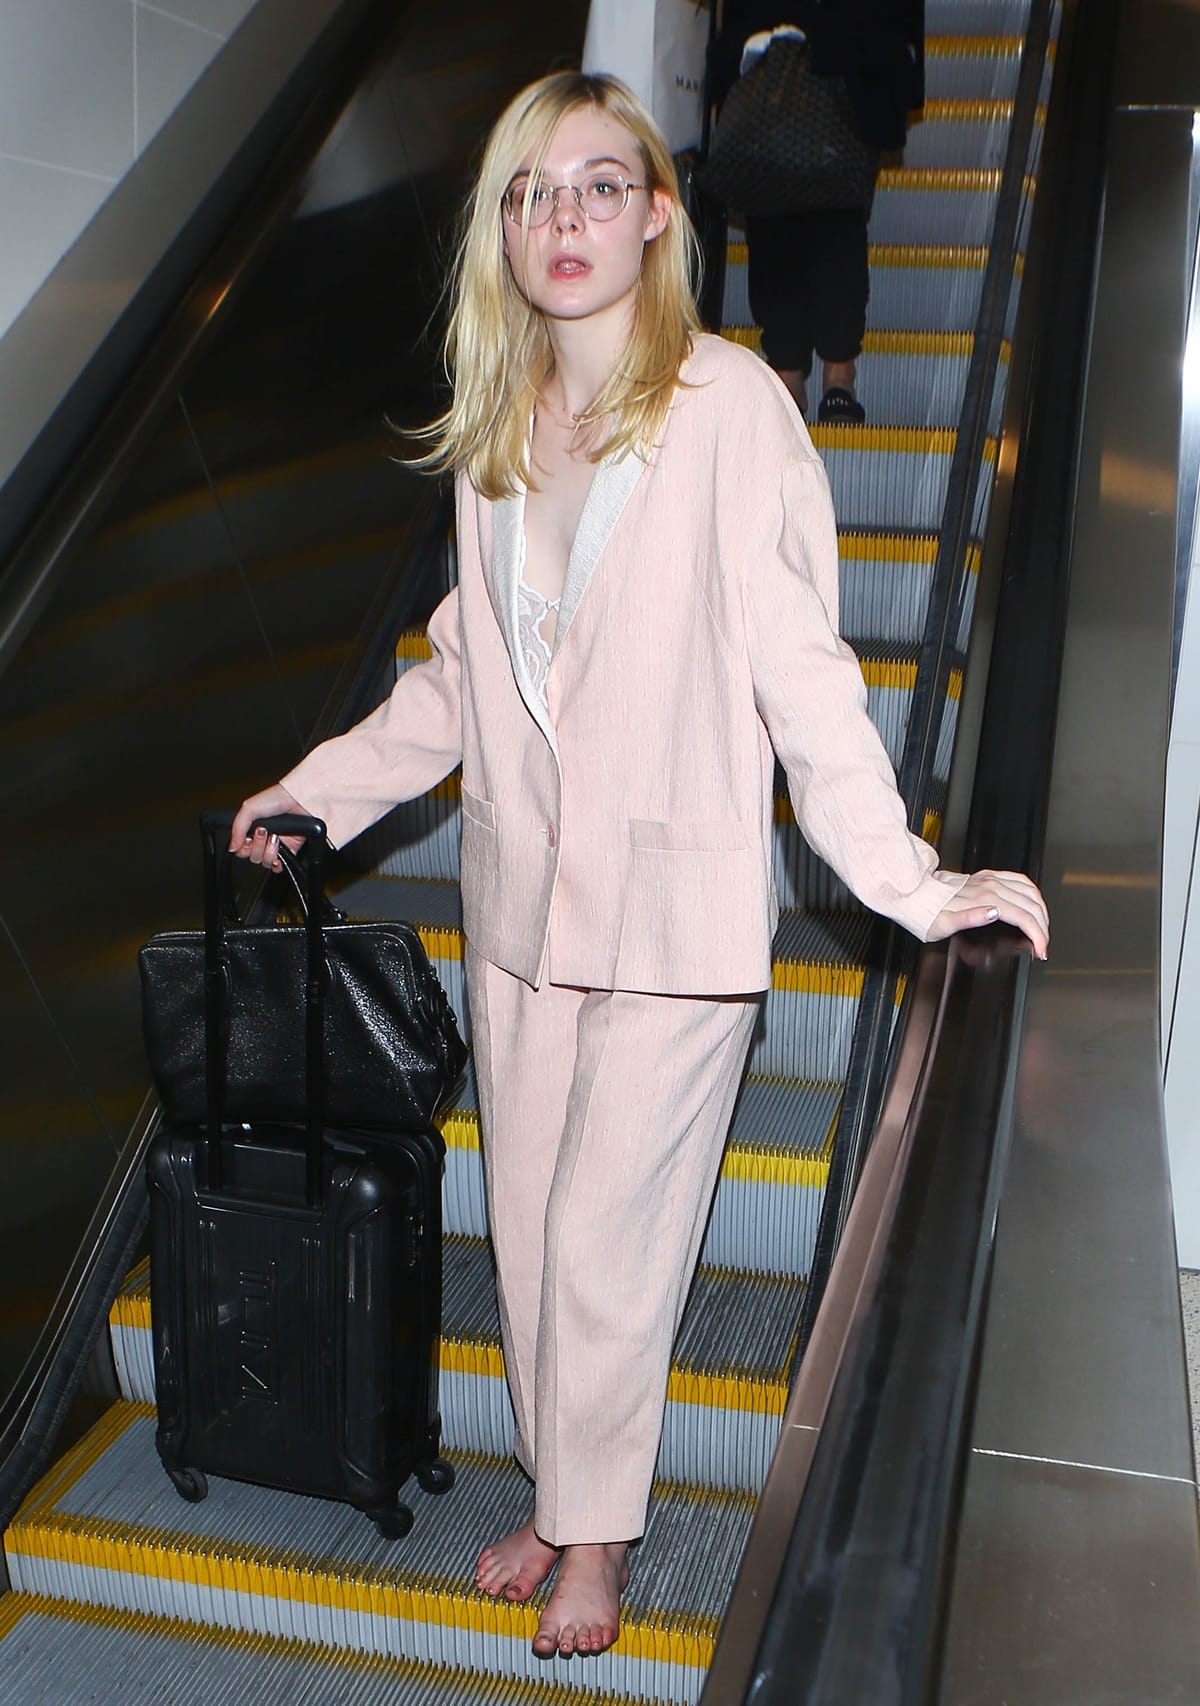 Elle Fanning was photographed arriving at the airport in a baggy pink pantsuit and glasses, without any shoes on her feet at LAX International Airport